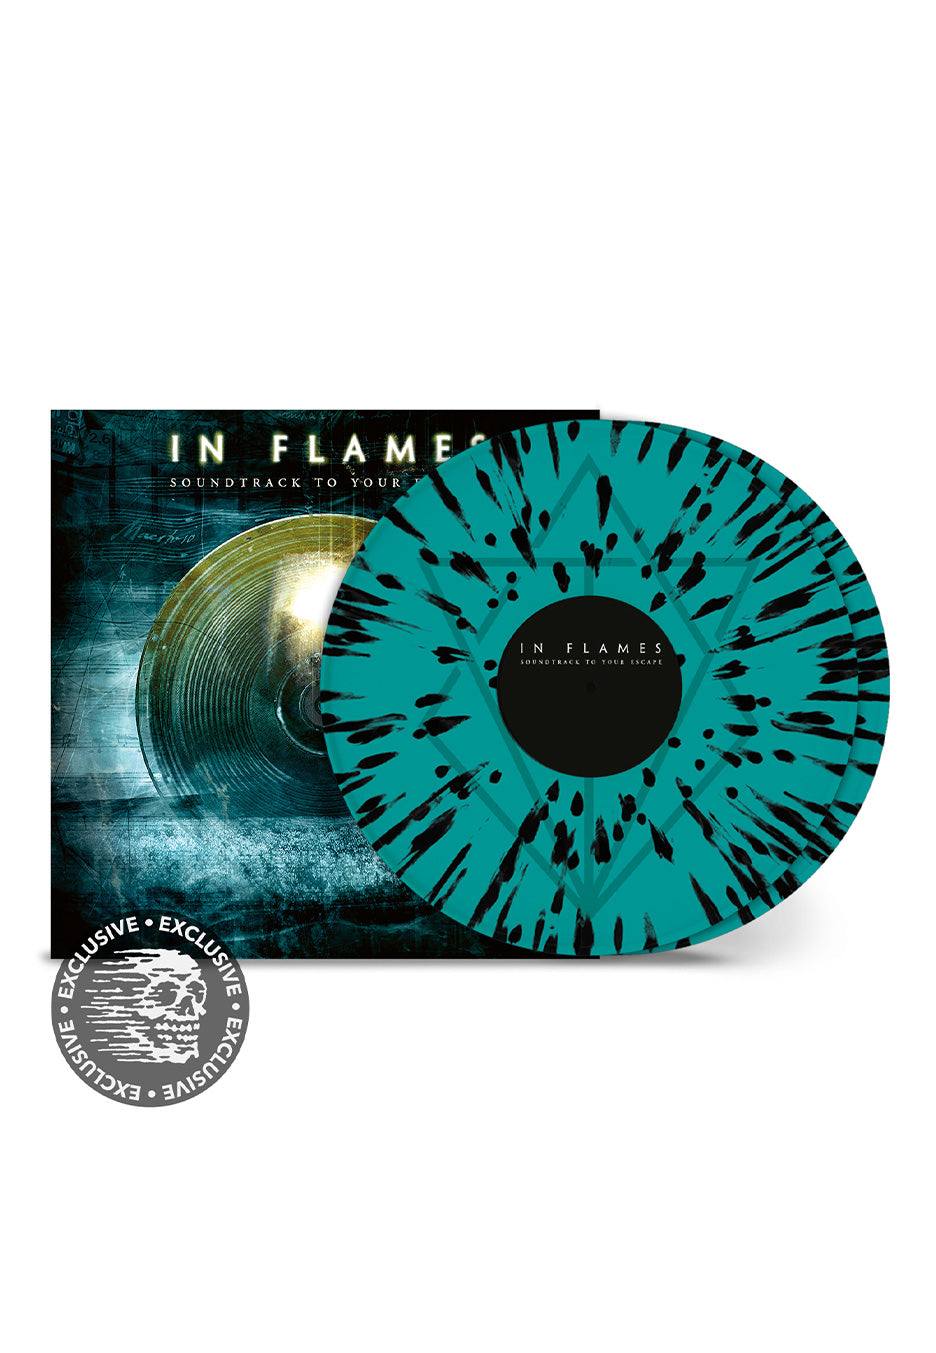 In Flames - Soundtrack To Your Escape (20th Anniversary) Ltd. Turquoise/Black - Splatter 2 Vinyl